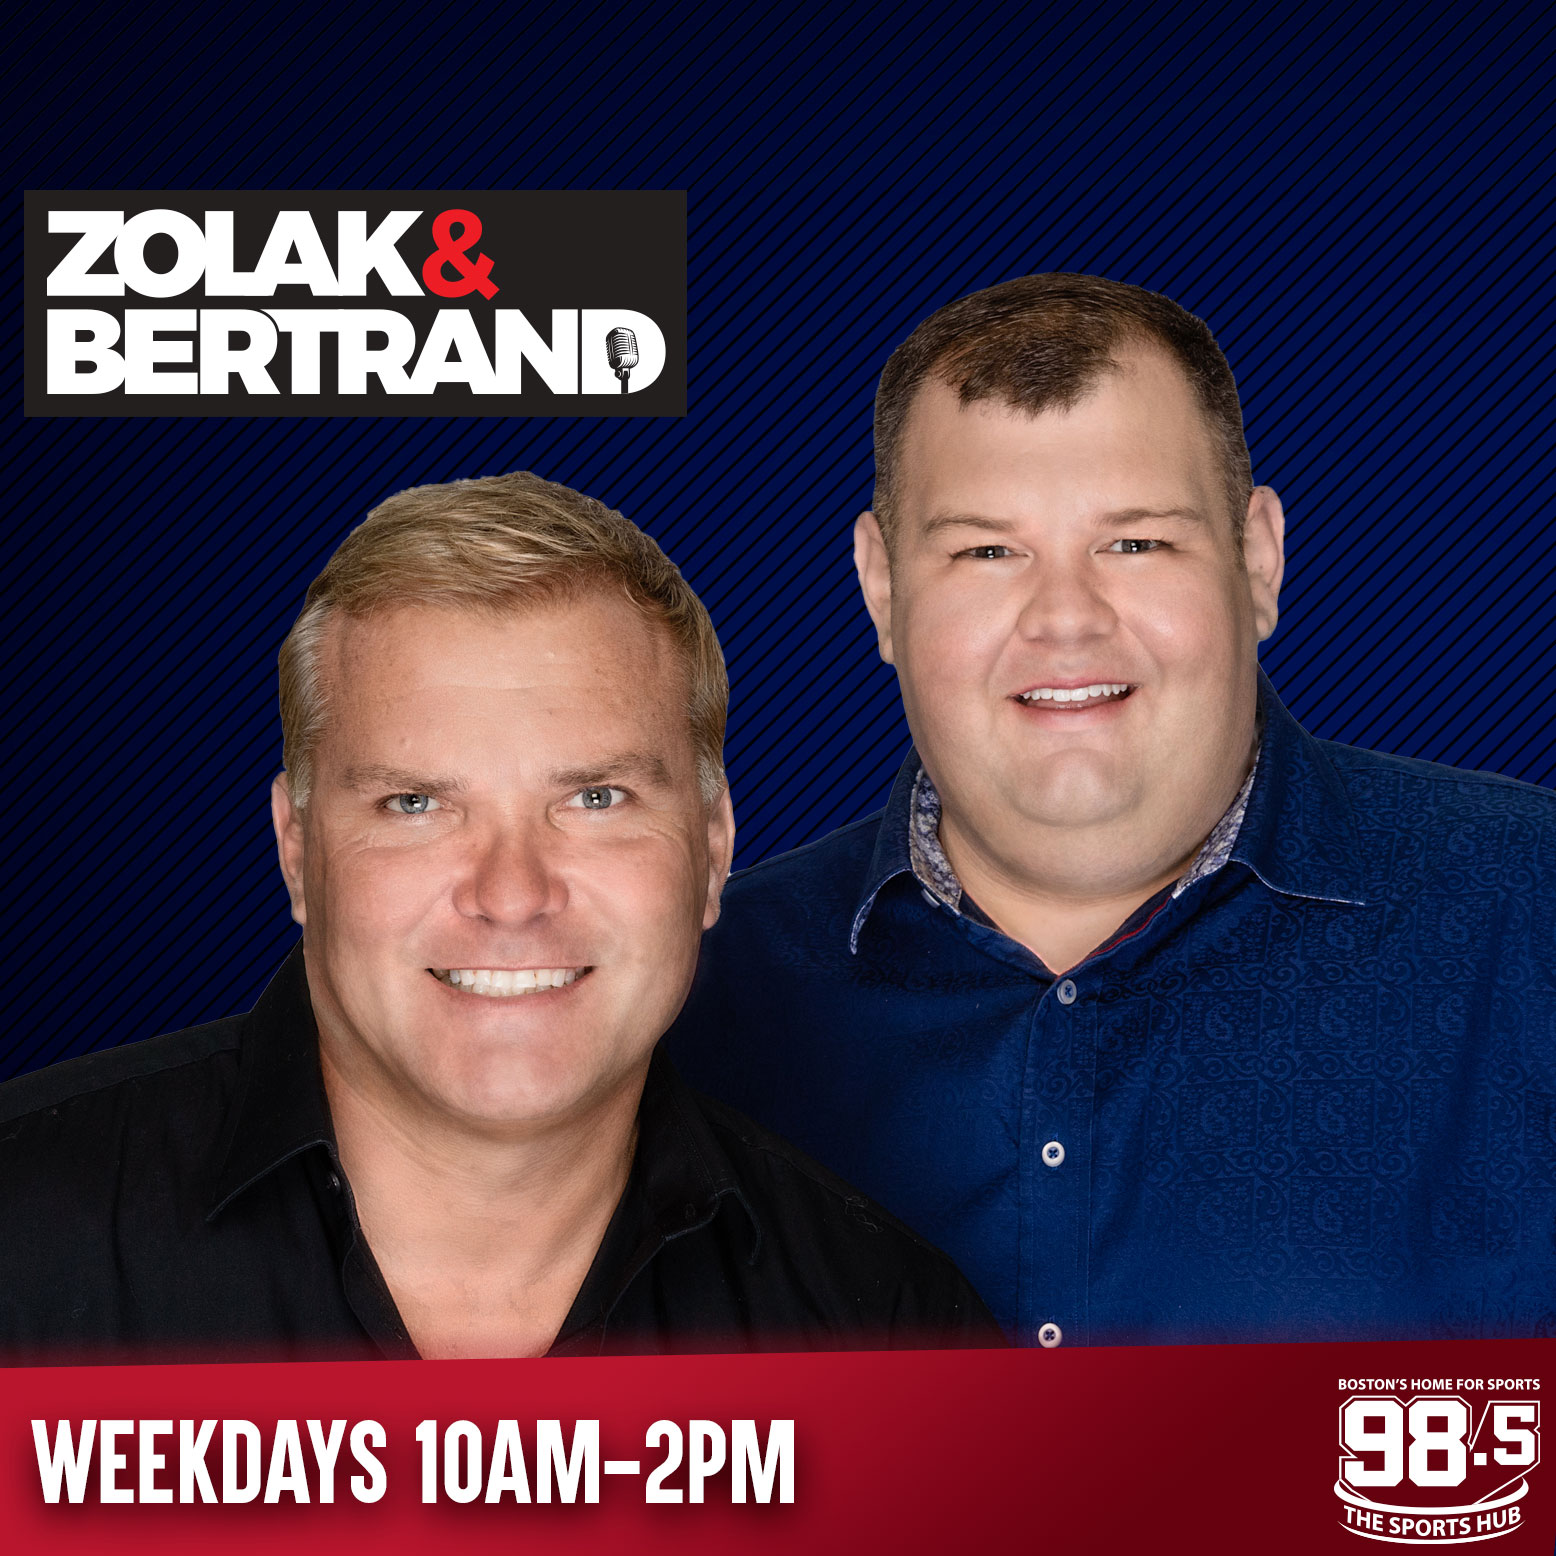 Zolak & Bertrand: Do you trust this coaching staff with a young QB?